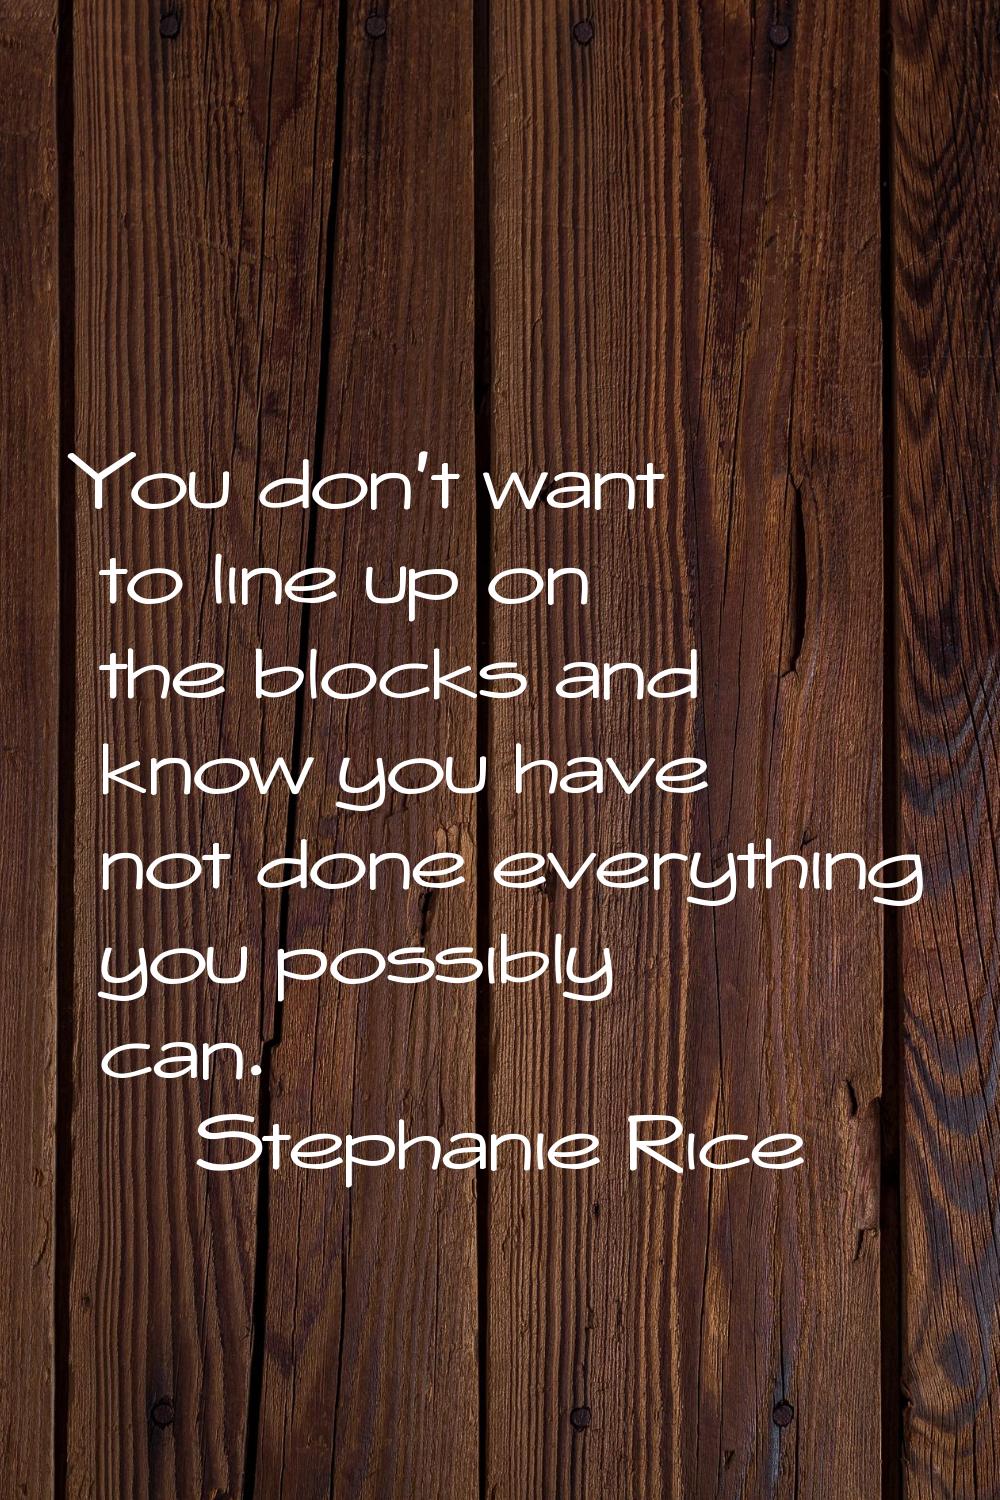 You don't want to line up on the blocks and know you have not done everything you possibly can.